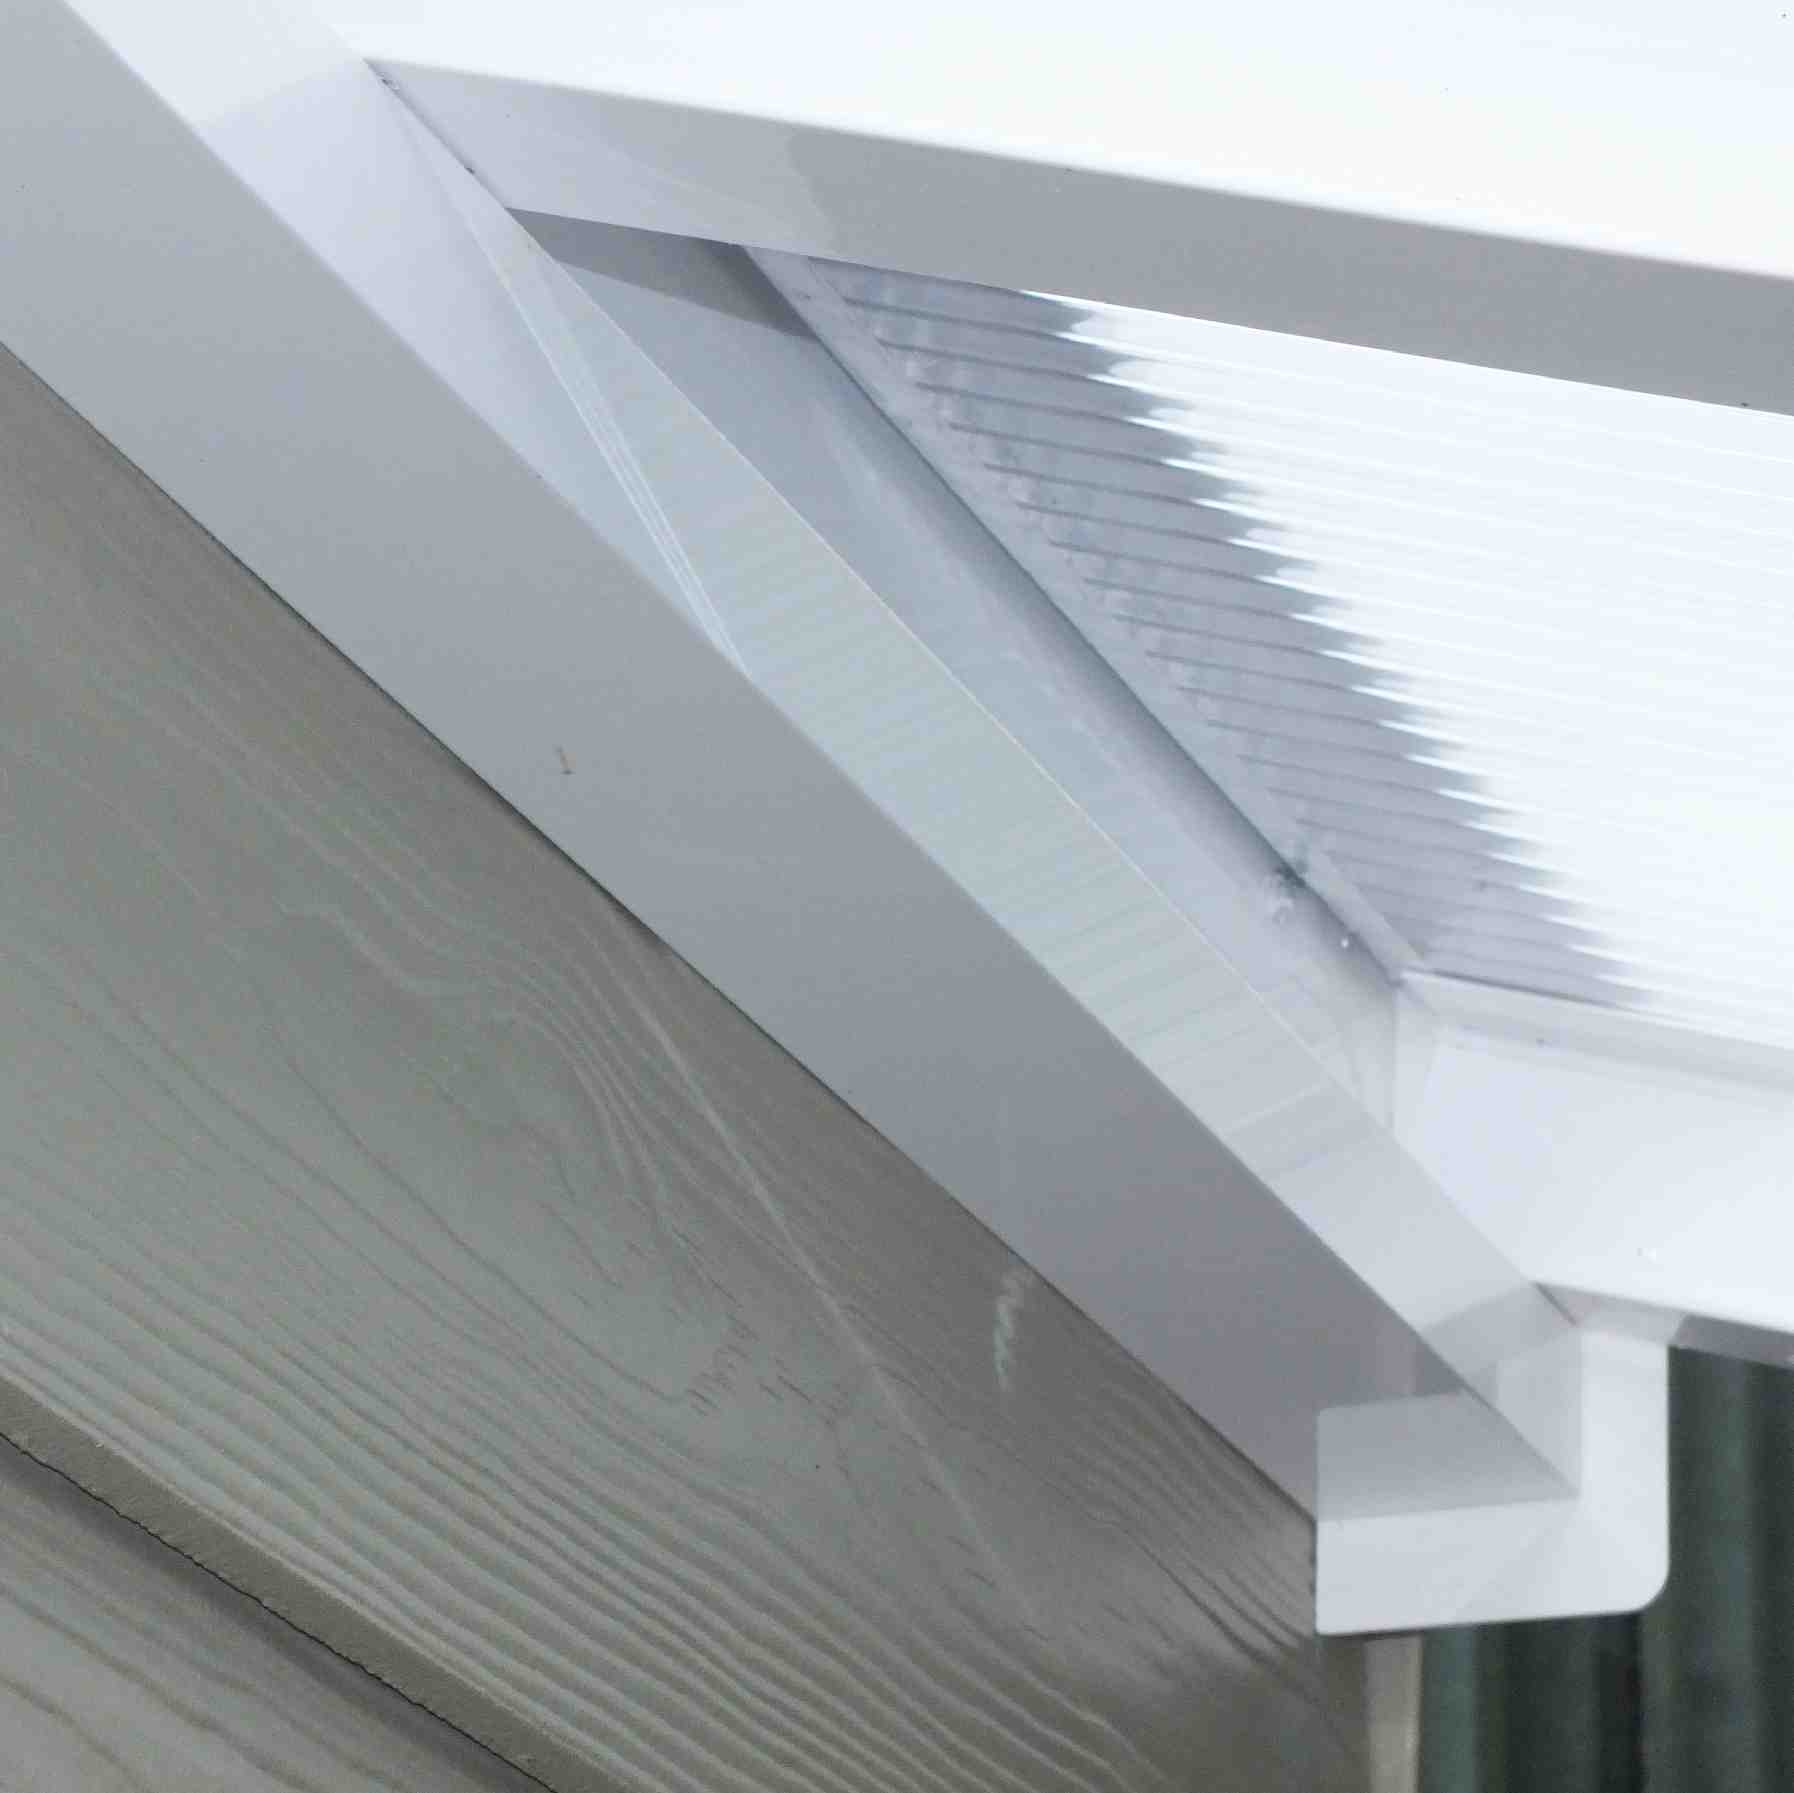 Great deals on Omega Verandah White with 16mm Polycarbonate Glazing - 11.4m (W) x 4.0m (P), (5) Supporting Posts